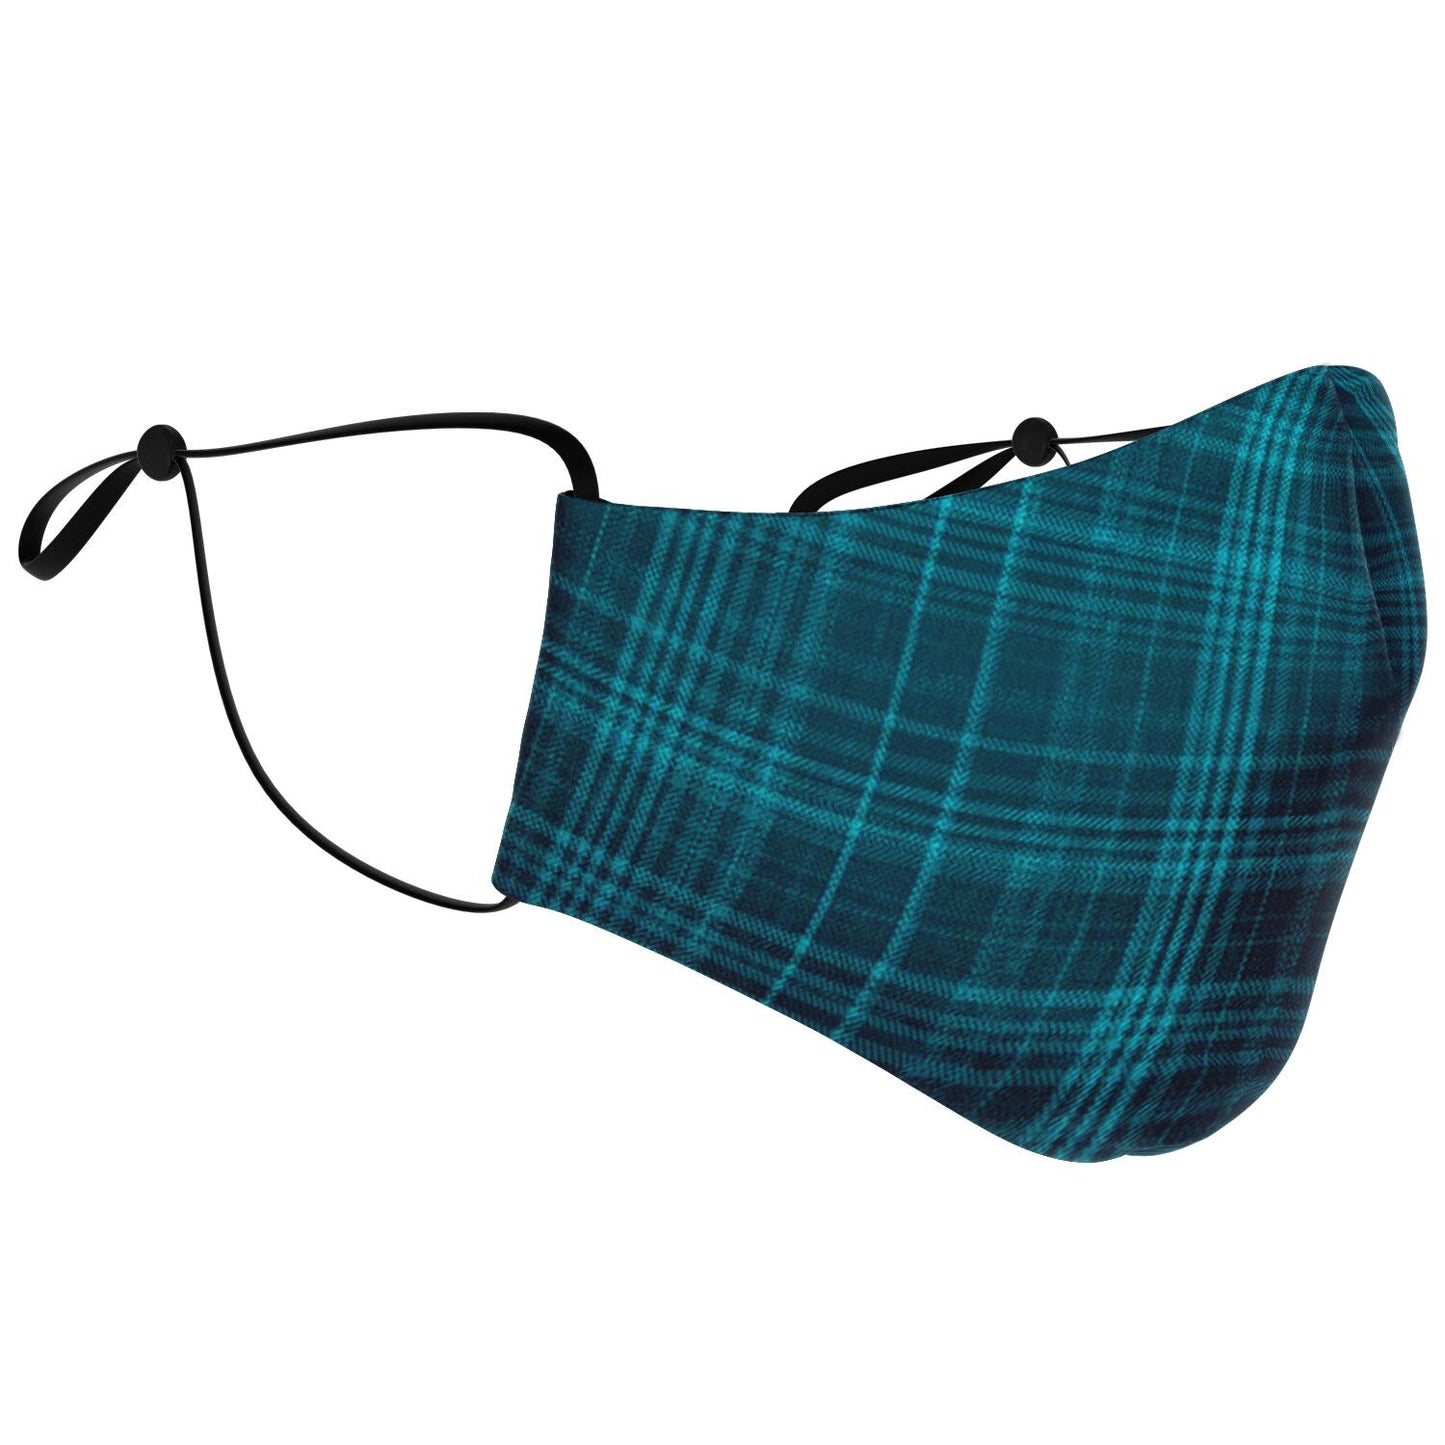 Tartan Plaid Cotton Face Mask With Filter, Fabric Dust Cloth Mouth Cover Fashion Washable Reusable Adult Men Women Kids Rave Mask Starcove Fashion